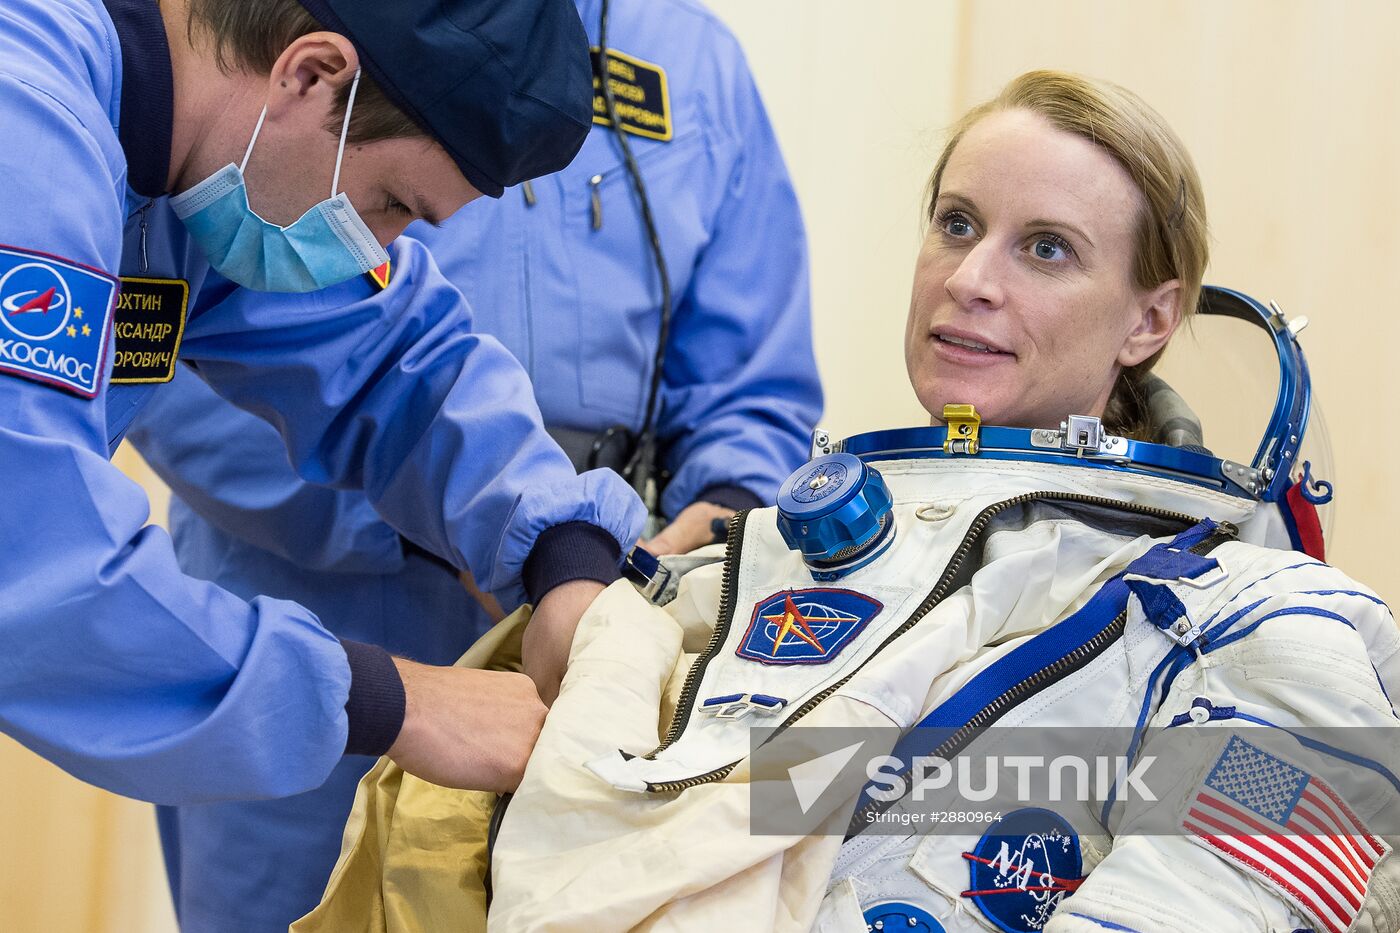 Preparations for ISS Expedition 48/49 launch